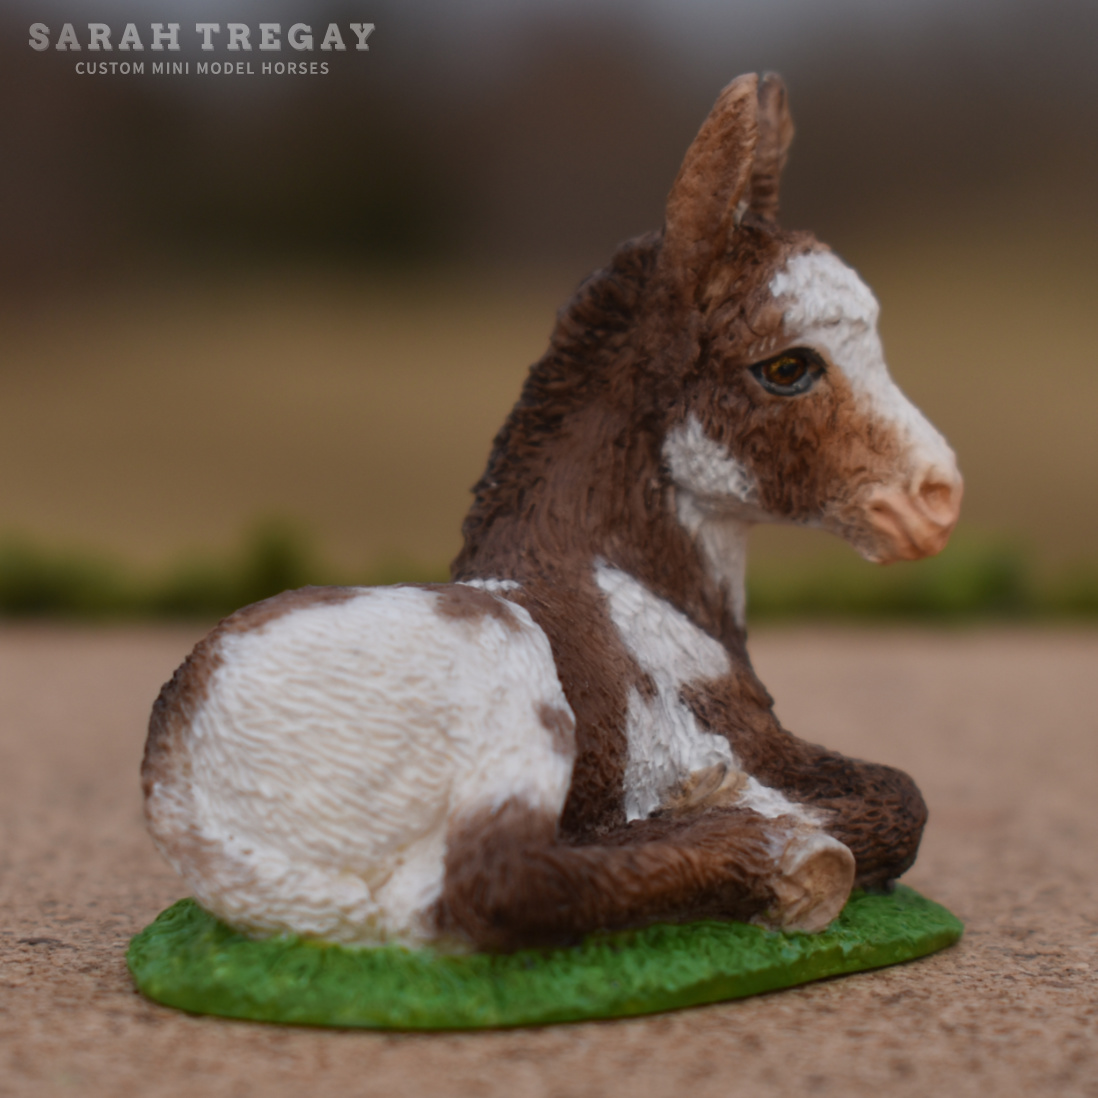 Painted by Sarah Tregay, a Palmerston Resin pinto donkey